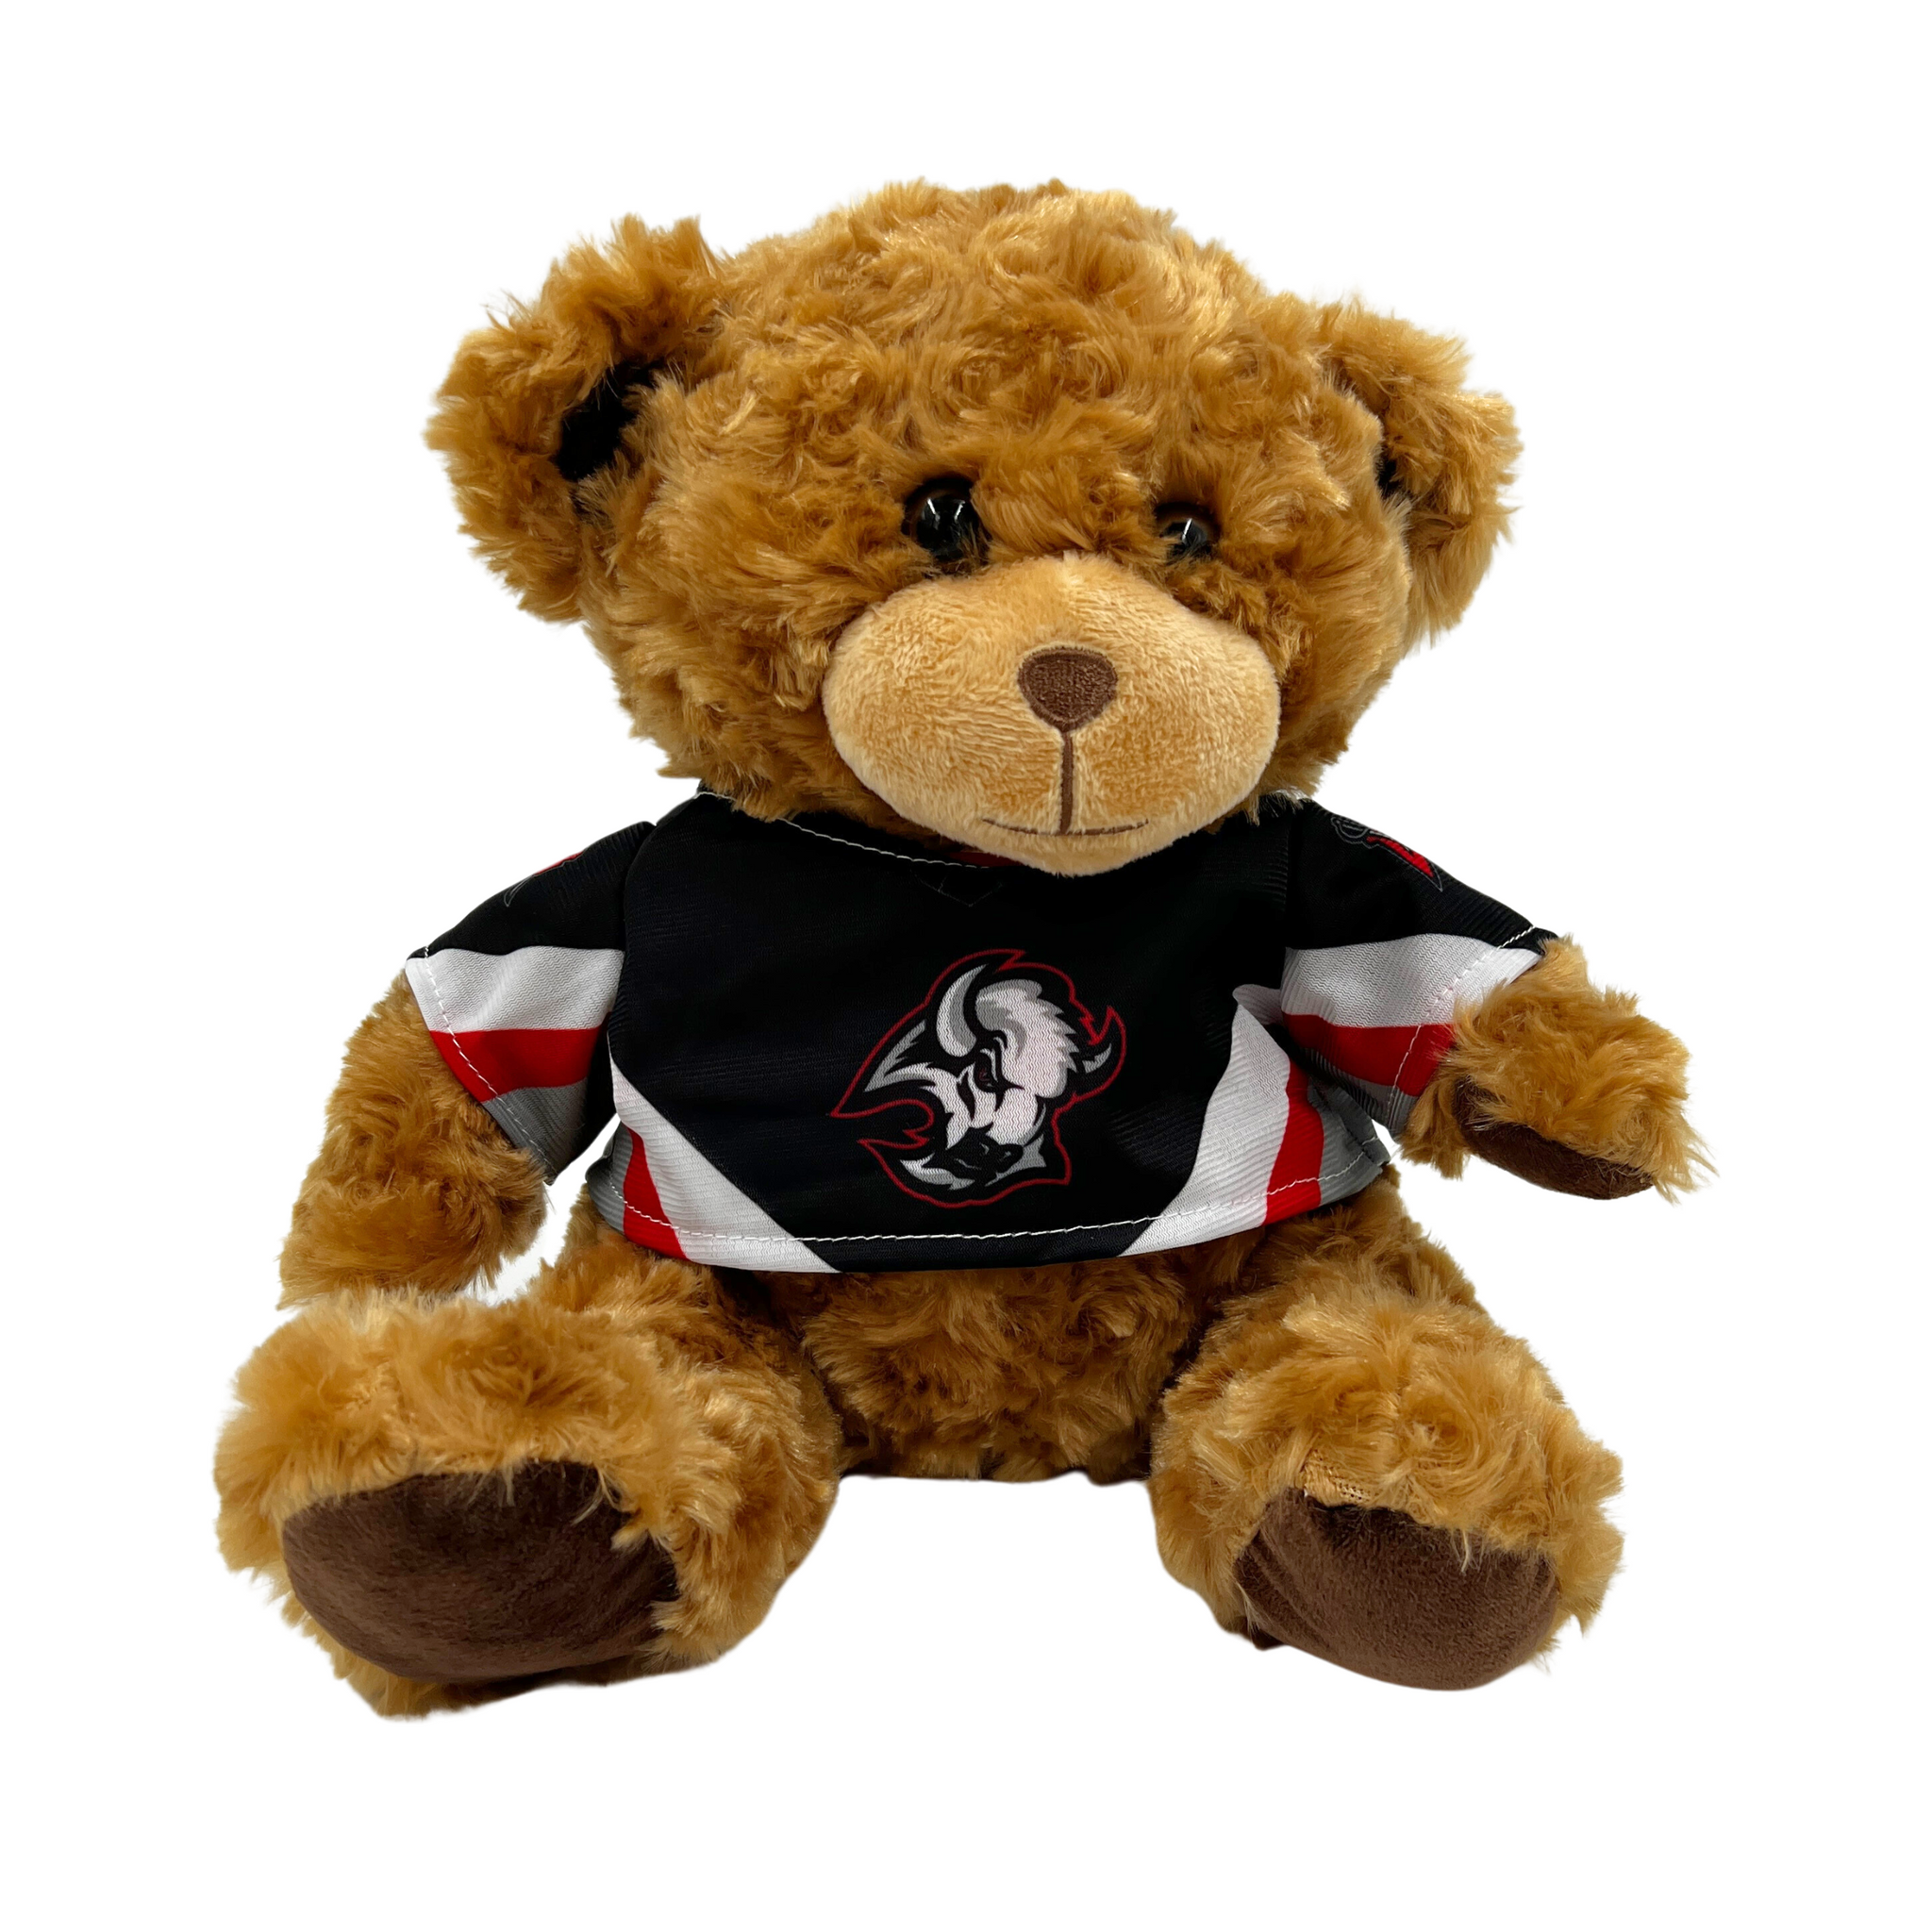 Buffalo Sabres Bear With Black & Red Jersey Stuffed Animal